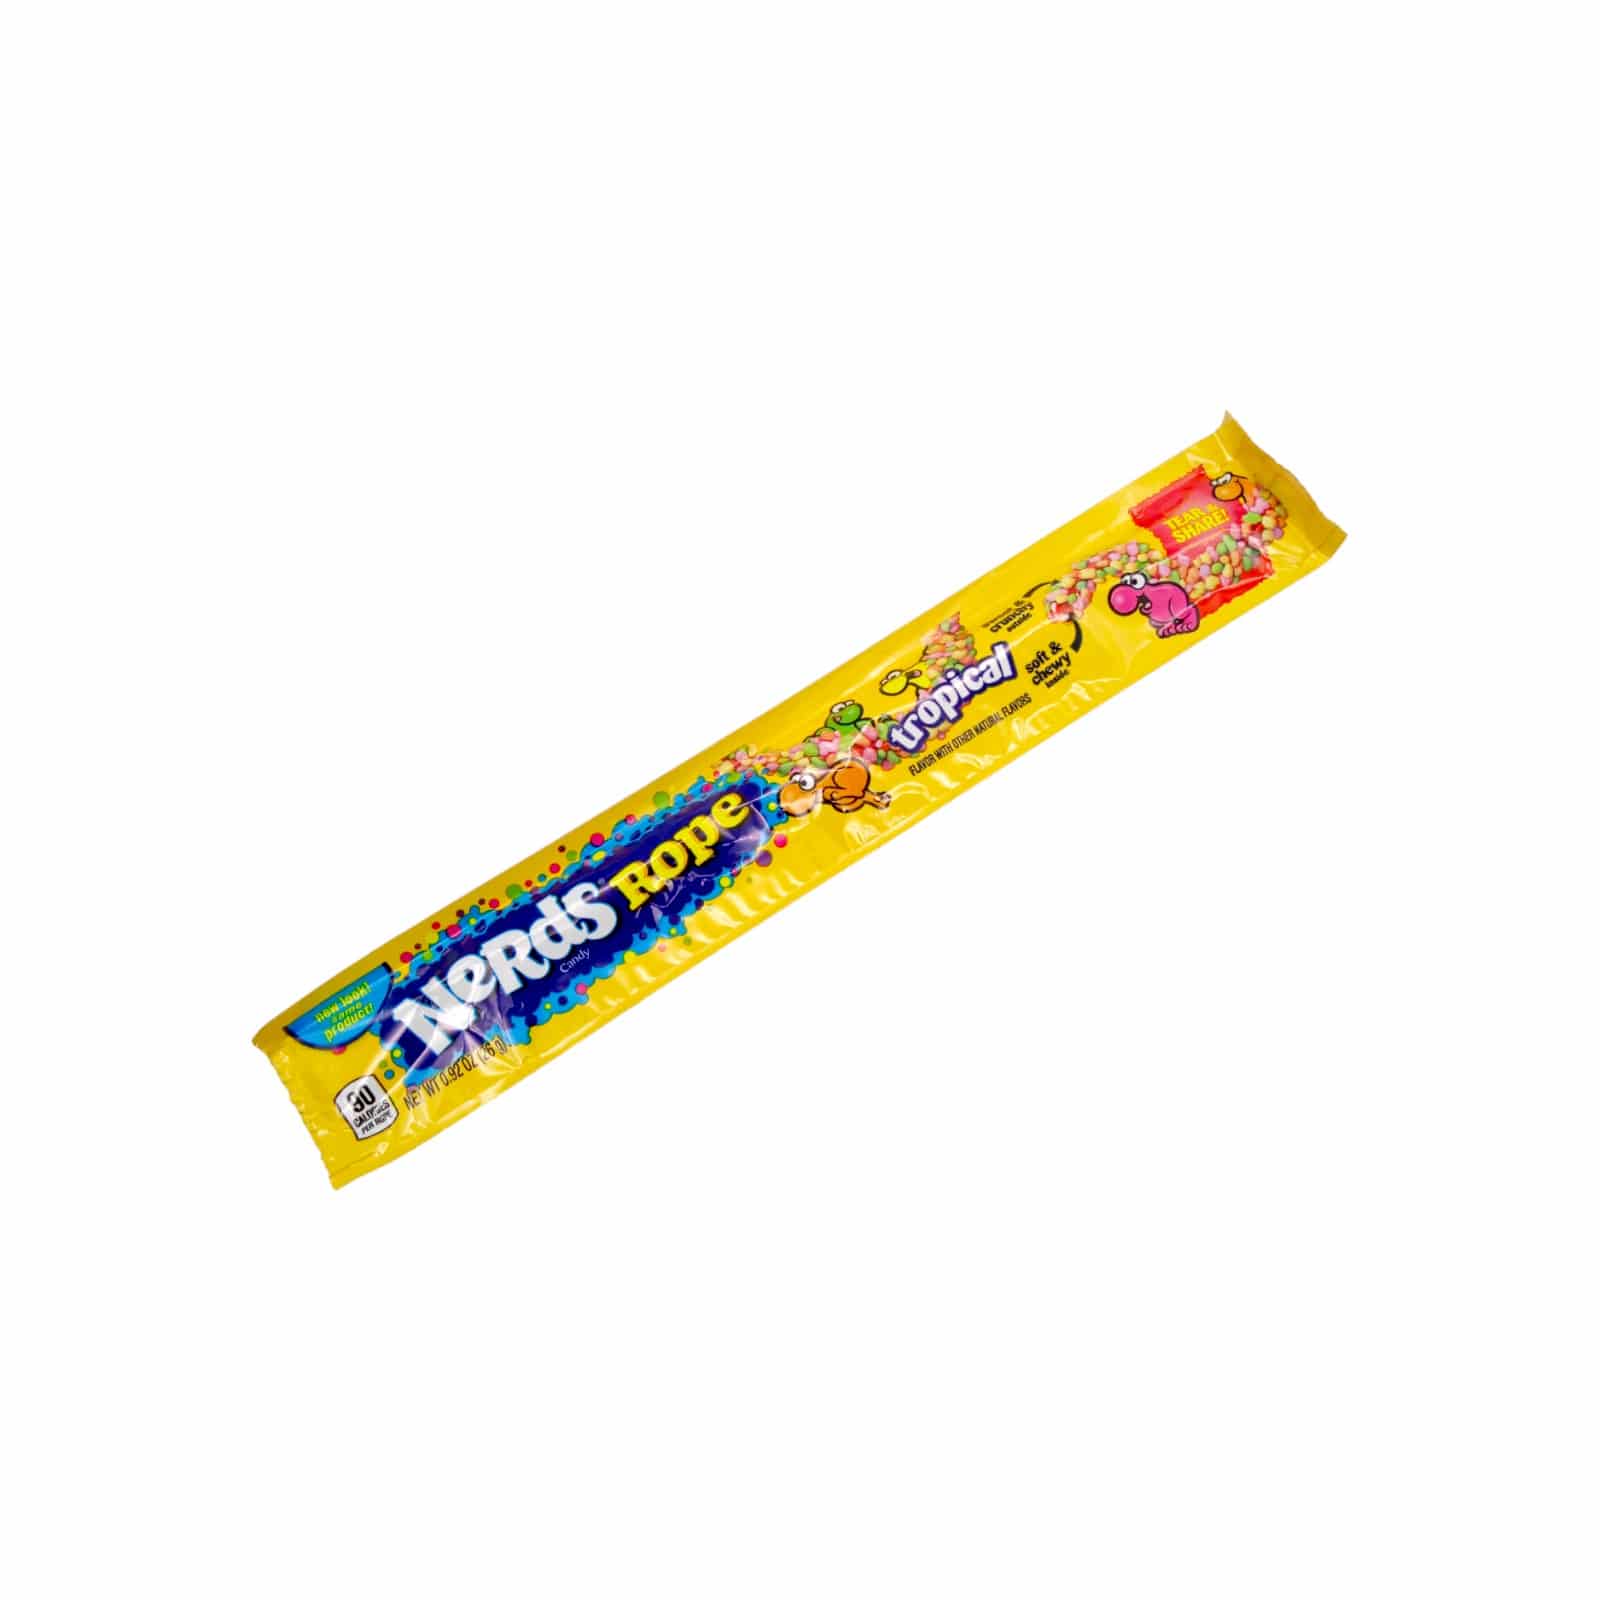 Nerds Ropes Tropical 26g